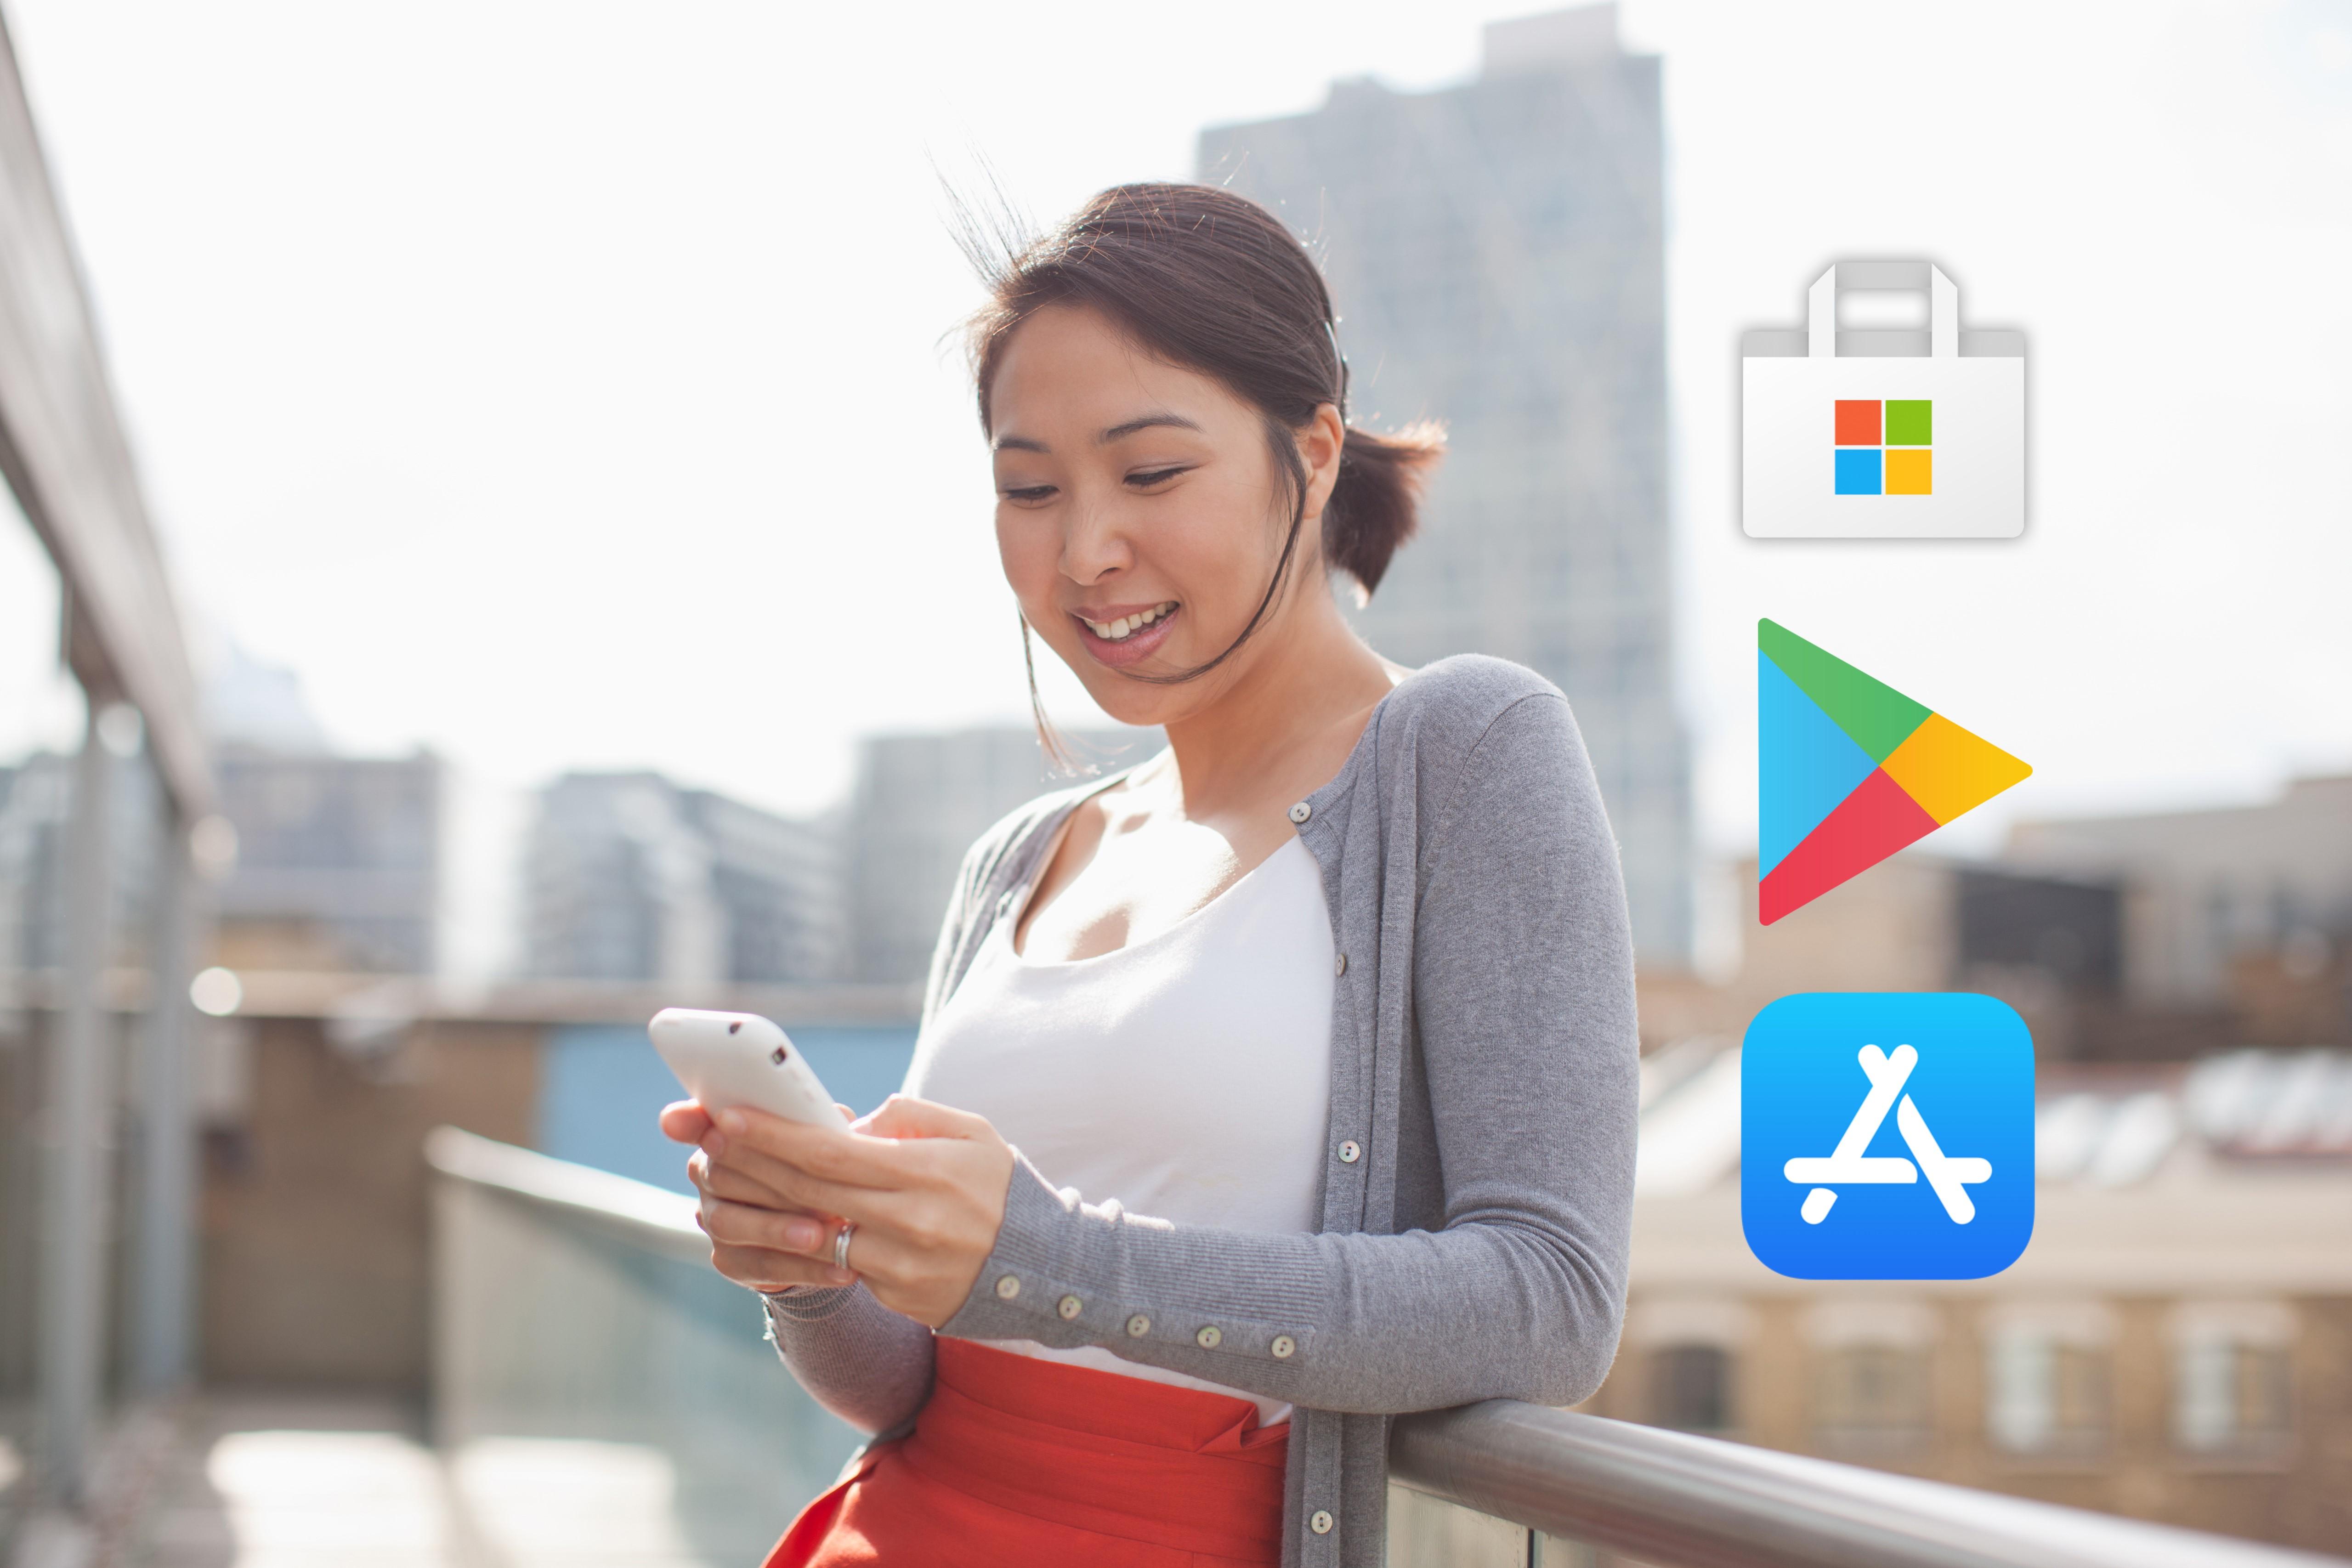 Apple App Store, Google Play, and Microsoft Windows Apps logos over woman looking at smartphone